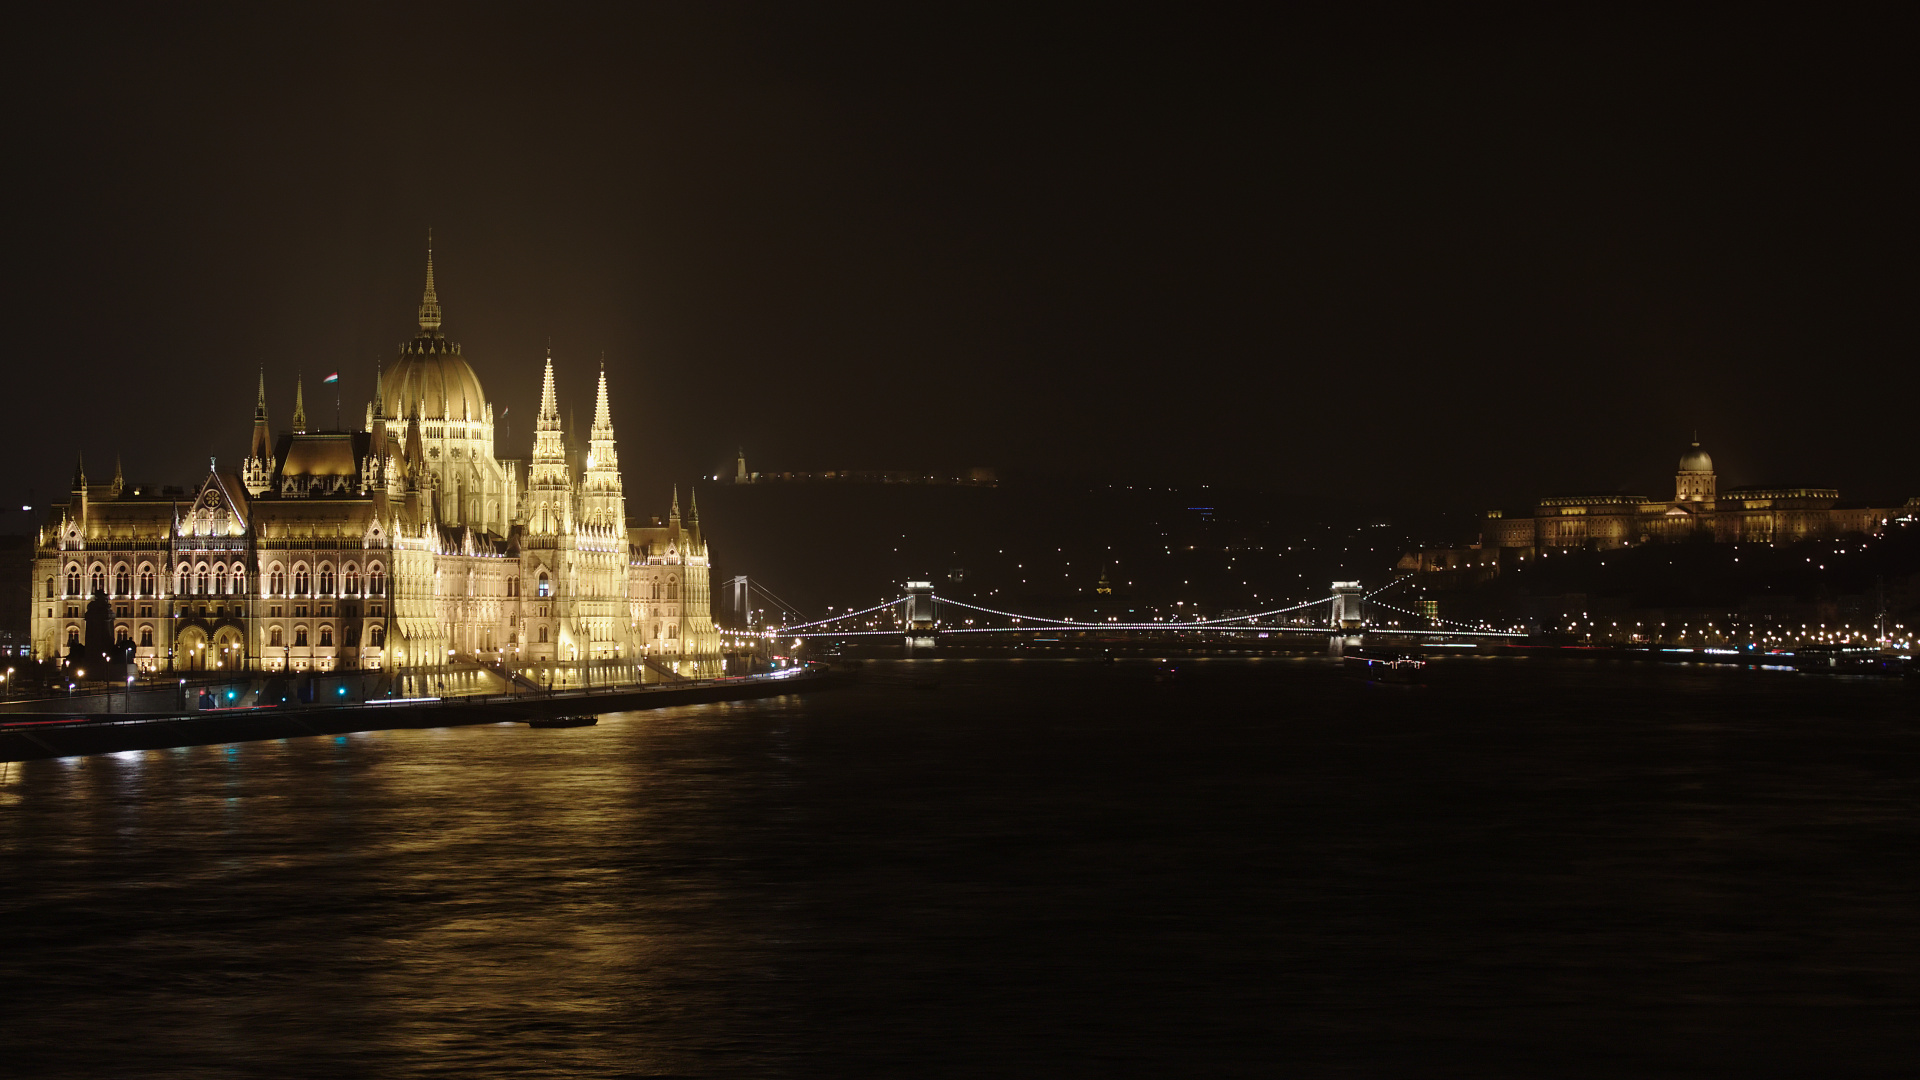 Danube, The Parliament Building, Széchenyi Chain Bridge and Buda Castle (Travels » Budapest » Budapest at Night)